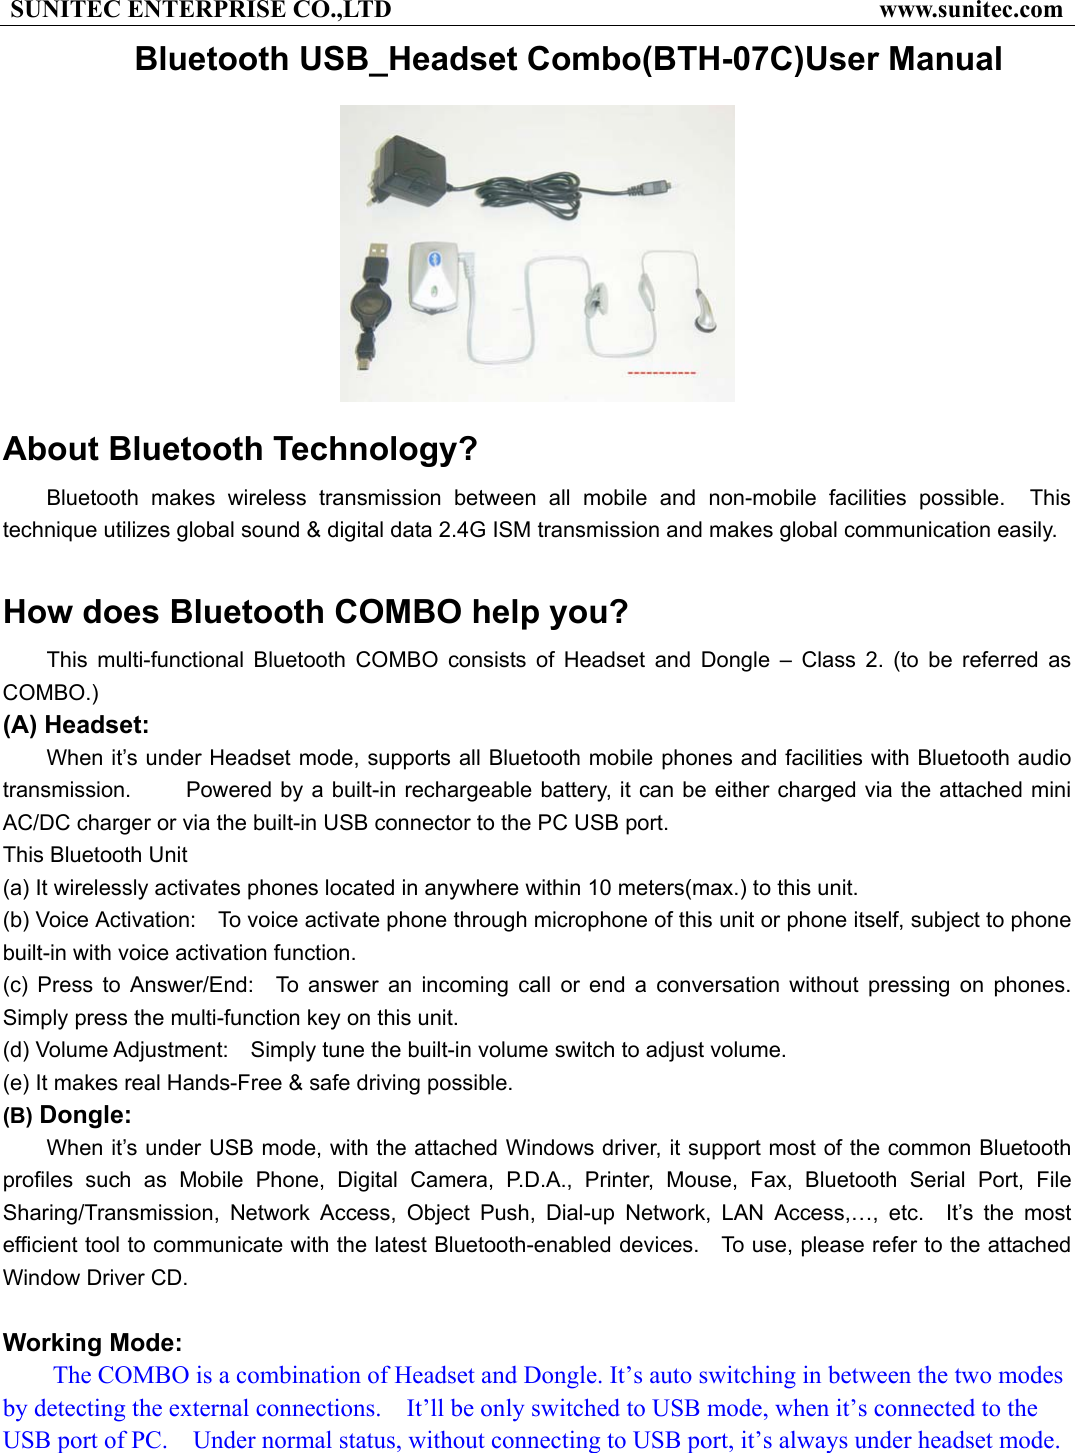 SUNITEC ENTERPRISE CO.,LTD                                       www.sunitec.com Bluetooth USB_Headset Combo(BTH-07C)User Manual  About Bluetooth Technology?     Bluetooth makes wireless transmission between all mobile and non-mobile facilities possible.  This technique utilizes global sound &amp; digital data 2.4G ISM transmission and makes global communication easily.    How does Bluetooth COMBO help you? This multi-functional Bluetooth COMBO consists of Headset and Dongle – Class 2. (to be referred as COMBO.)   (A) Headset: When it’s under Headset mode, supports all Bluetooth mobile phones and facilities with Bluetooth audio transmission.     Powered by a built-in rechargeable battery, it can be either charged via the attached mini AC/DC charger or via the built-in USB connector to the PC USB port.       This Bluetooth Unit        (a) It wirelessly activates phones located in anywhere within 10 meters(max.) to this unit.     (b) Voice Activation:    To voice activate phone through microphone of this unit or phone itself, subject to phone built-in with voice activation function.   (c) Press to Answer/End:  To answer an incoming call or end a conversation without pressing on phones.  Simply press the multi-function key on this unit.     (d) Volume Adjustment:    Simply tune the built-in volume switch to adjust volume.     (e) It makes real Hands-Free &amp; safe driving possible. (B) Dongle:   When it’s under USB mode, with the attached Windows driver, it support most of the common Bluetooth profiles such as Mobile Phone, Digital Camera, P.D.A., Printer, Mouse, Fax, Bluetooth Serial Port, File Sharing/Transmission, Network Access, Object Push, Dial-up Network, LAN Access,…, etc.  It’s the most efficient tool to communicate with the latest Bluetooth-enabled devices.    To use, please refer to the attached Window Driver CD.  Working Mode: The COMBO is a combination of Headset and Dongle. It’s auto switching in between the two modes by detecting the external connections.    It’ll be only switched to USB mode, when it’s connected to the USB port of PC.    Under normal status, without connecting to USB port, it’s always under headset mode.   